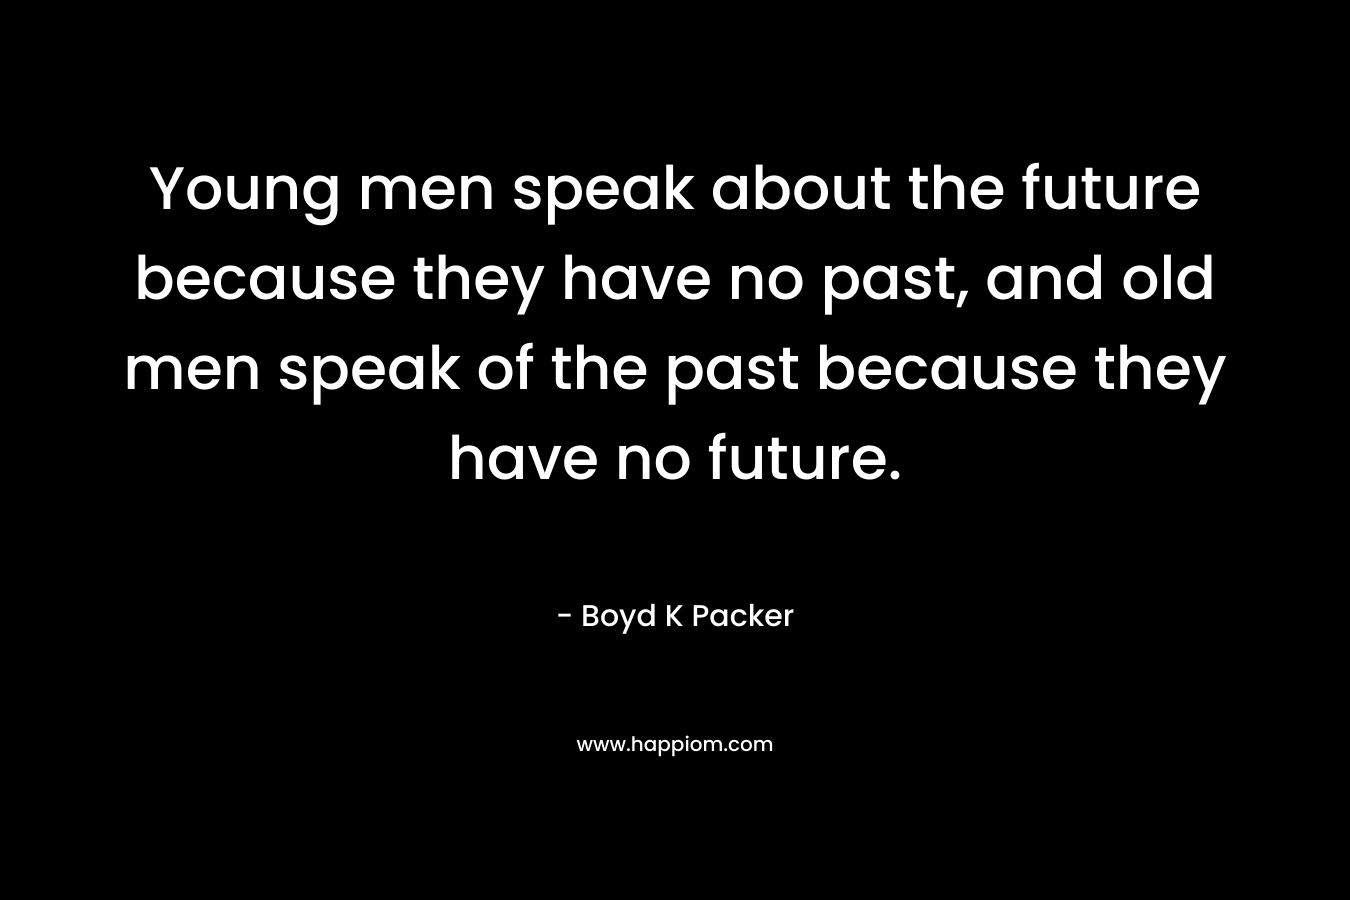 Young men speak about the future because they have no past, and old men speak of the past because they have no future. – Boyd K Packer